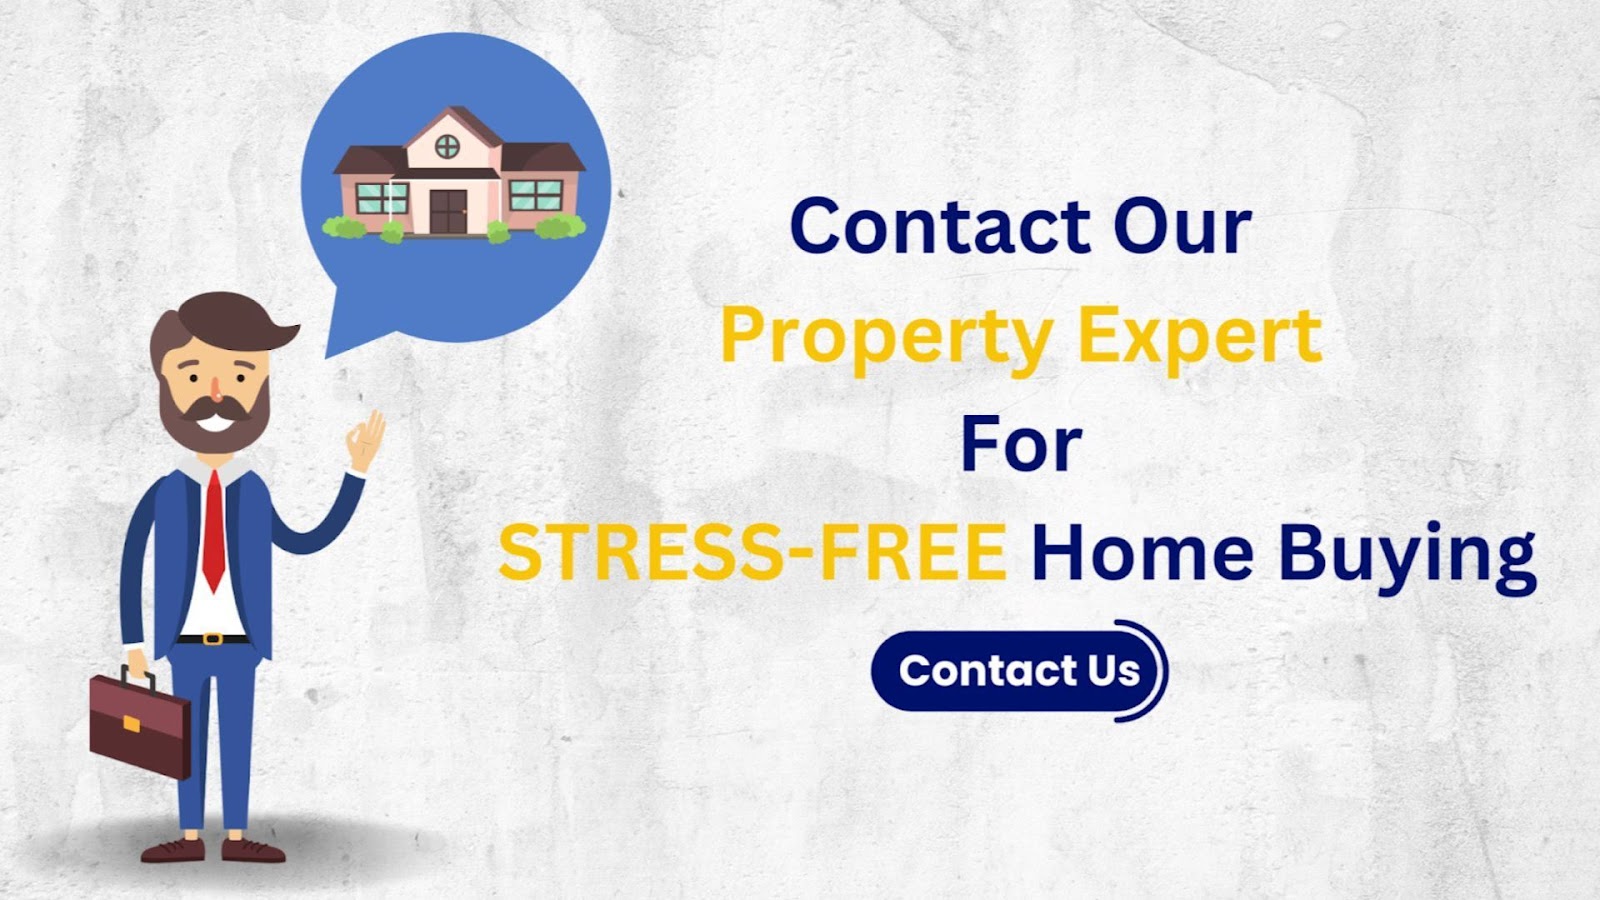 Contact PropertyCloud real estate expert for the best advice related to properties and services